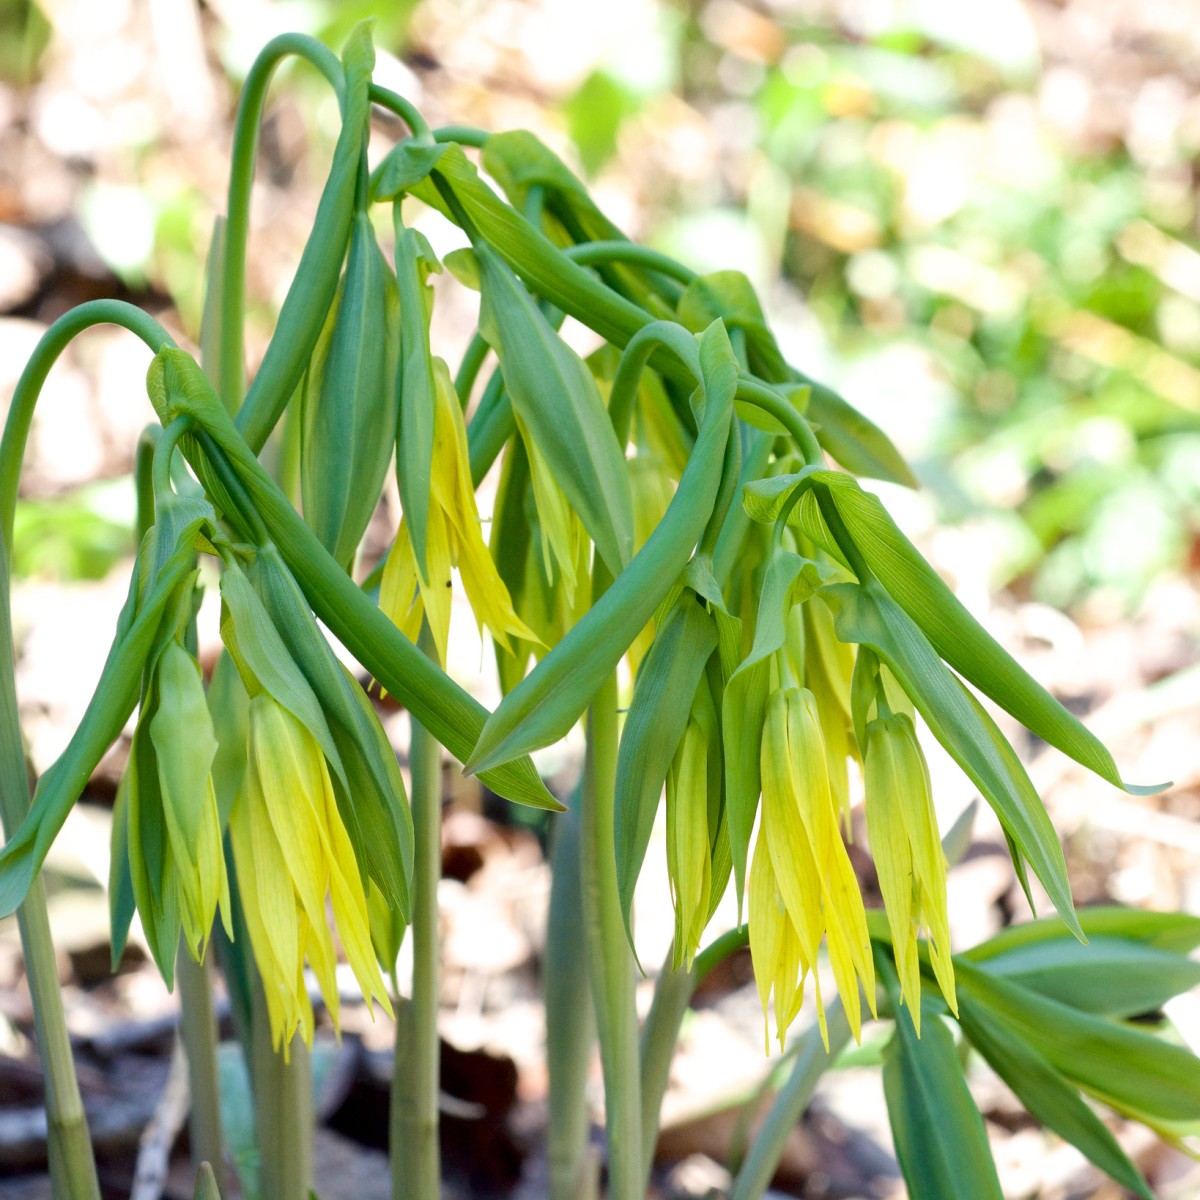 Know Your Natives – Large-Flower Bellwort